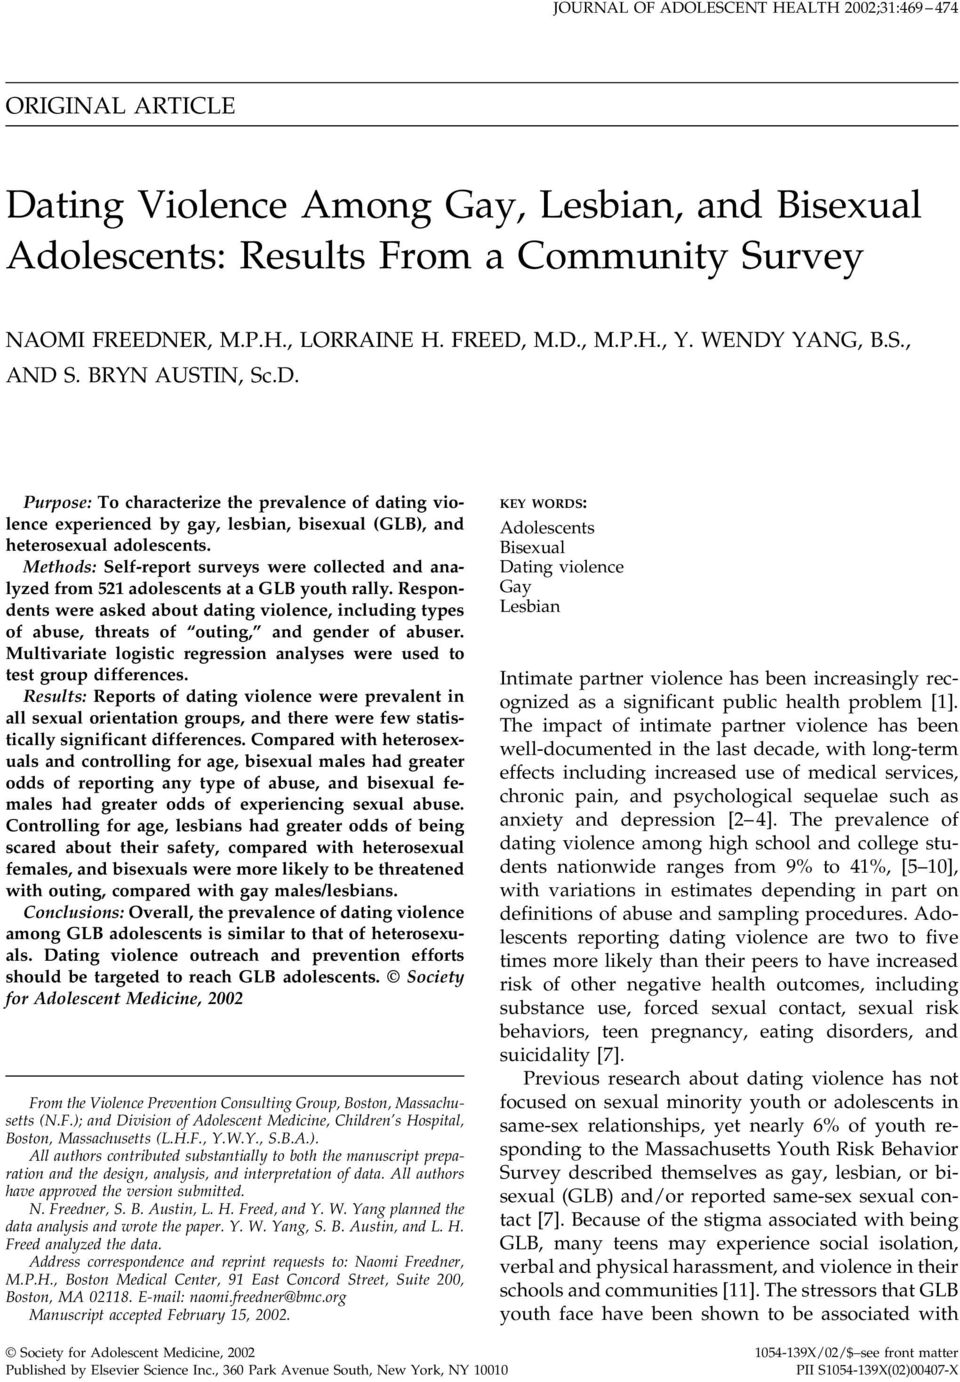 Methods: Self-report surveys were collected and analyzed from 521 adolescents at a GLB youth rally.